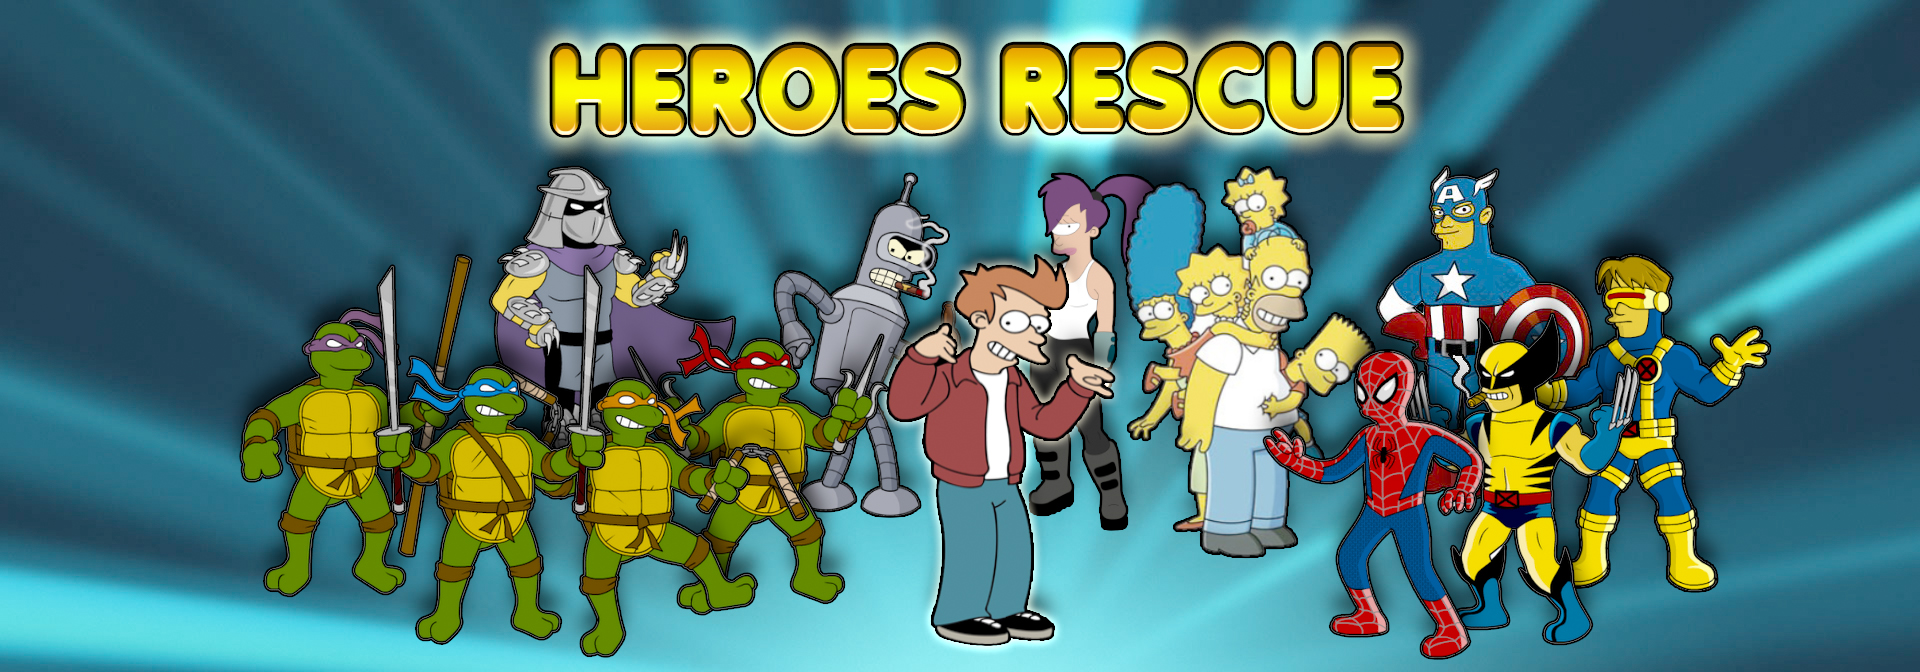 Heroes Rescue